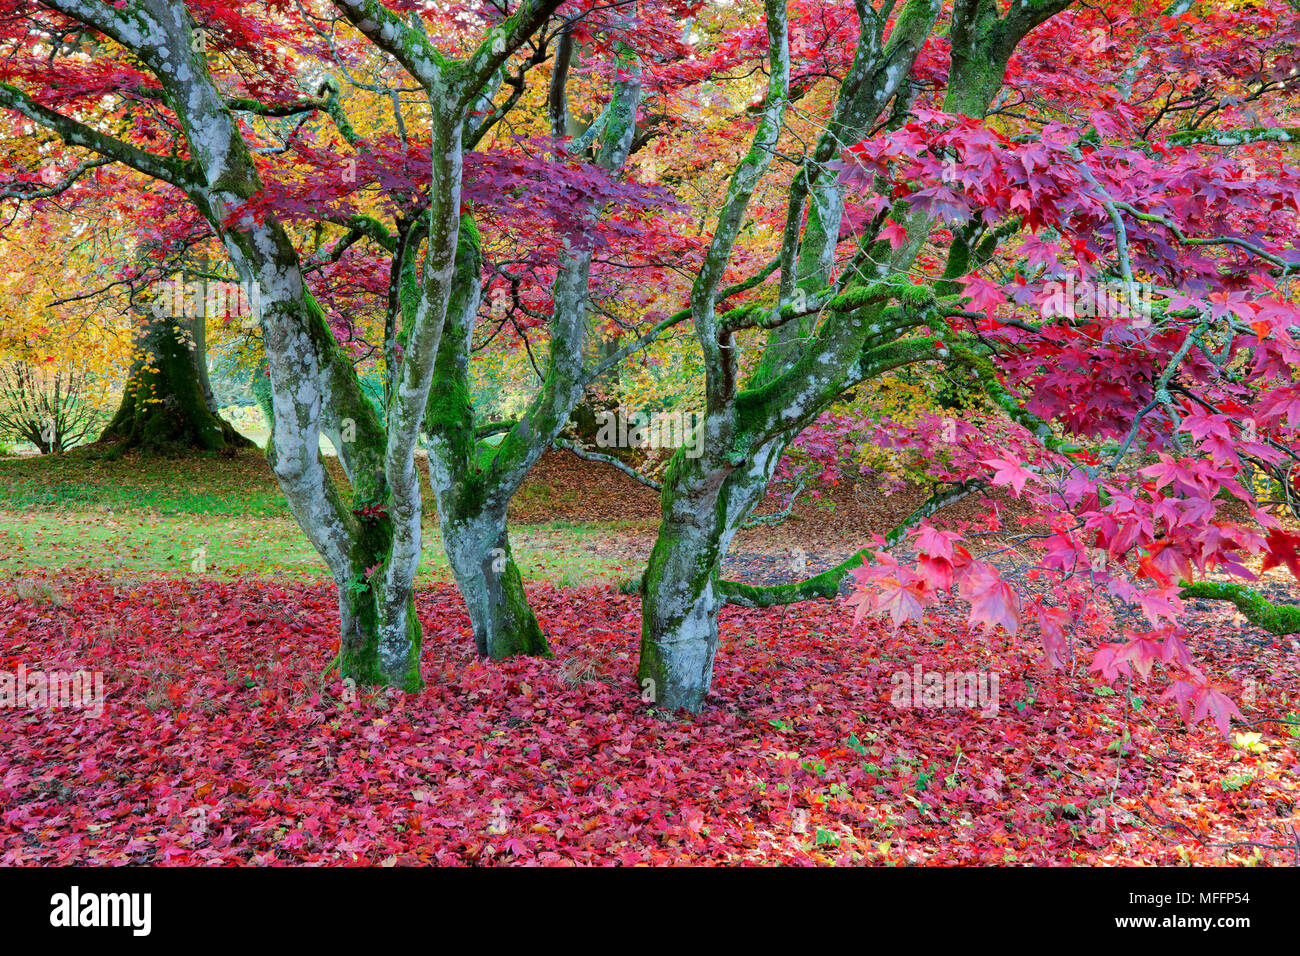 Leaves in shades of red covering trees. Stock Photo